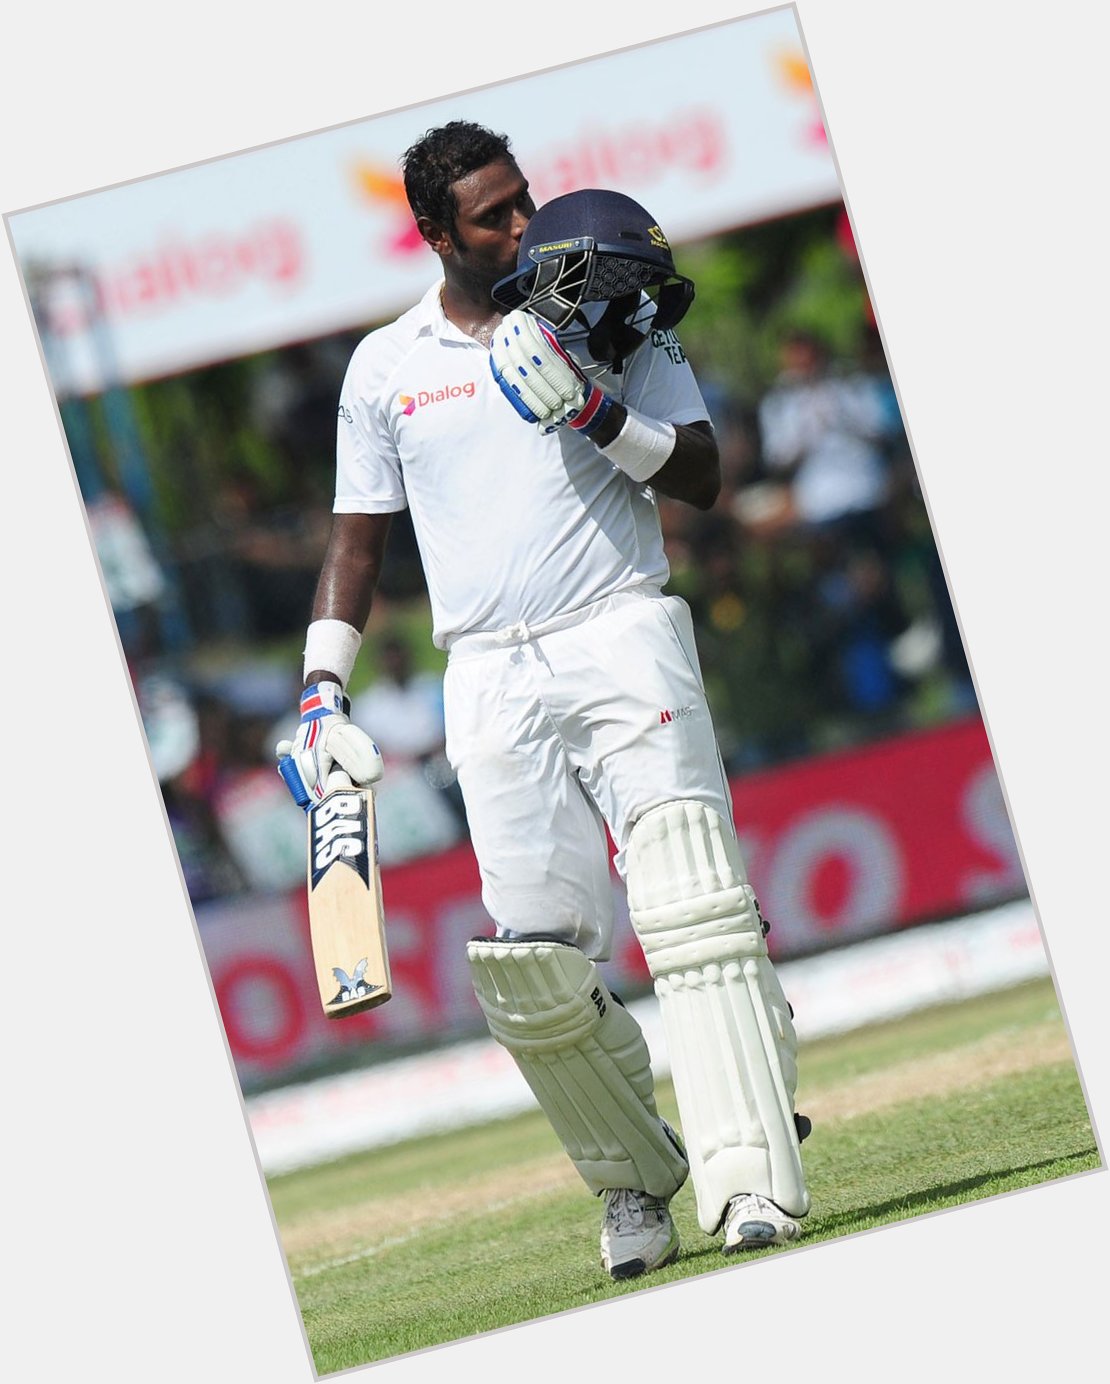 Happy birthday to Angelo Mathews. One of the cricketers I enjoy watching out in the middle. 